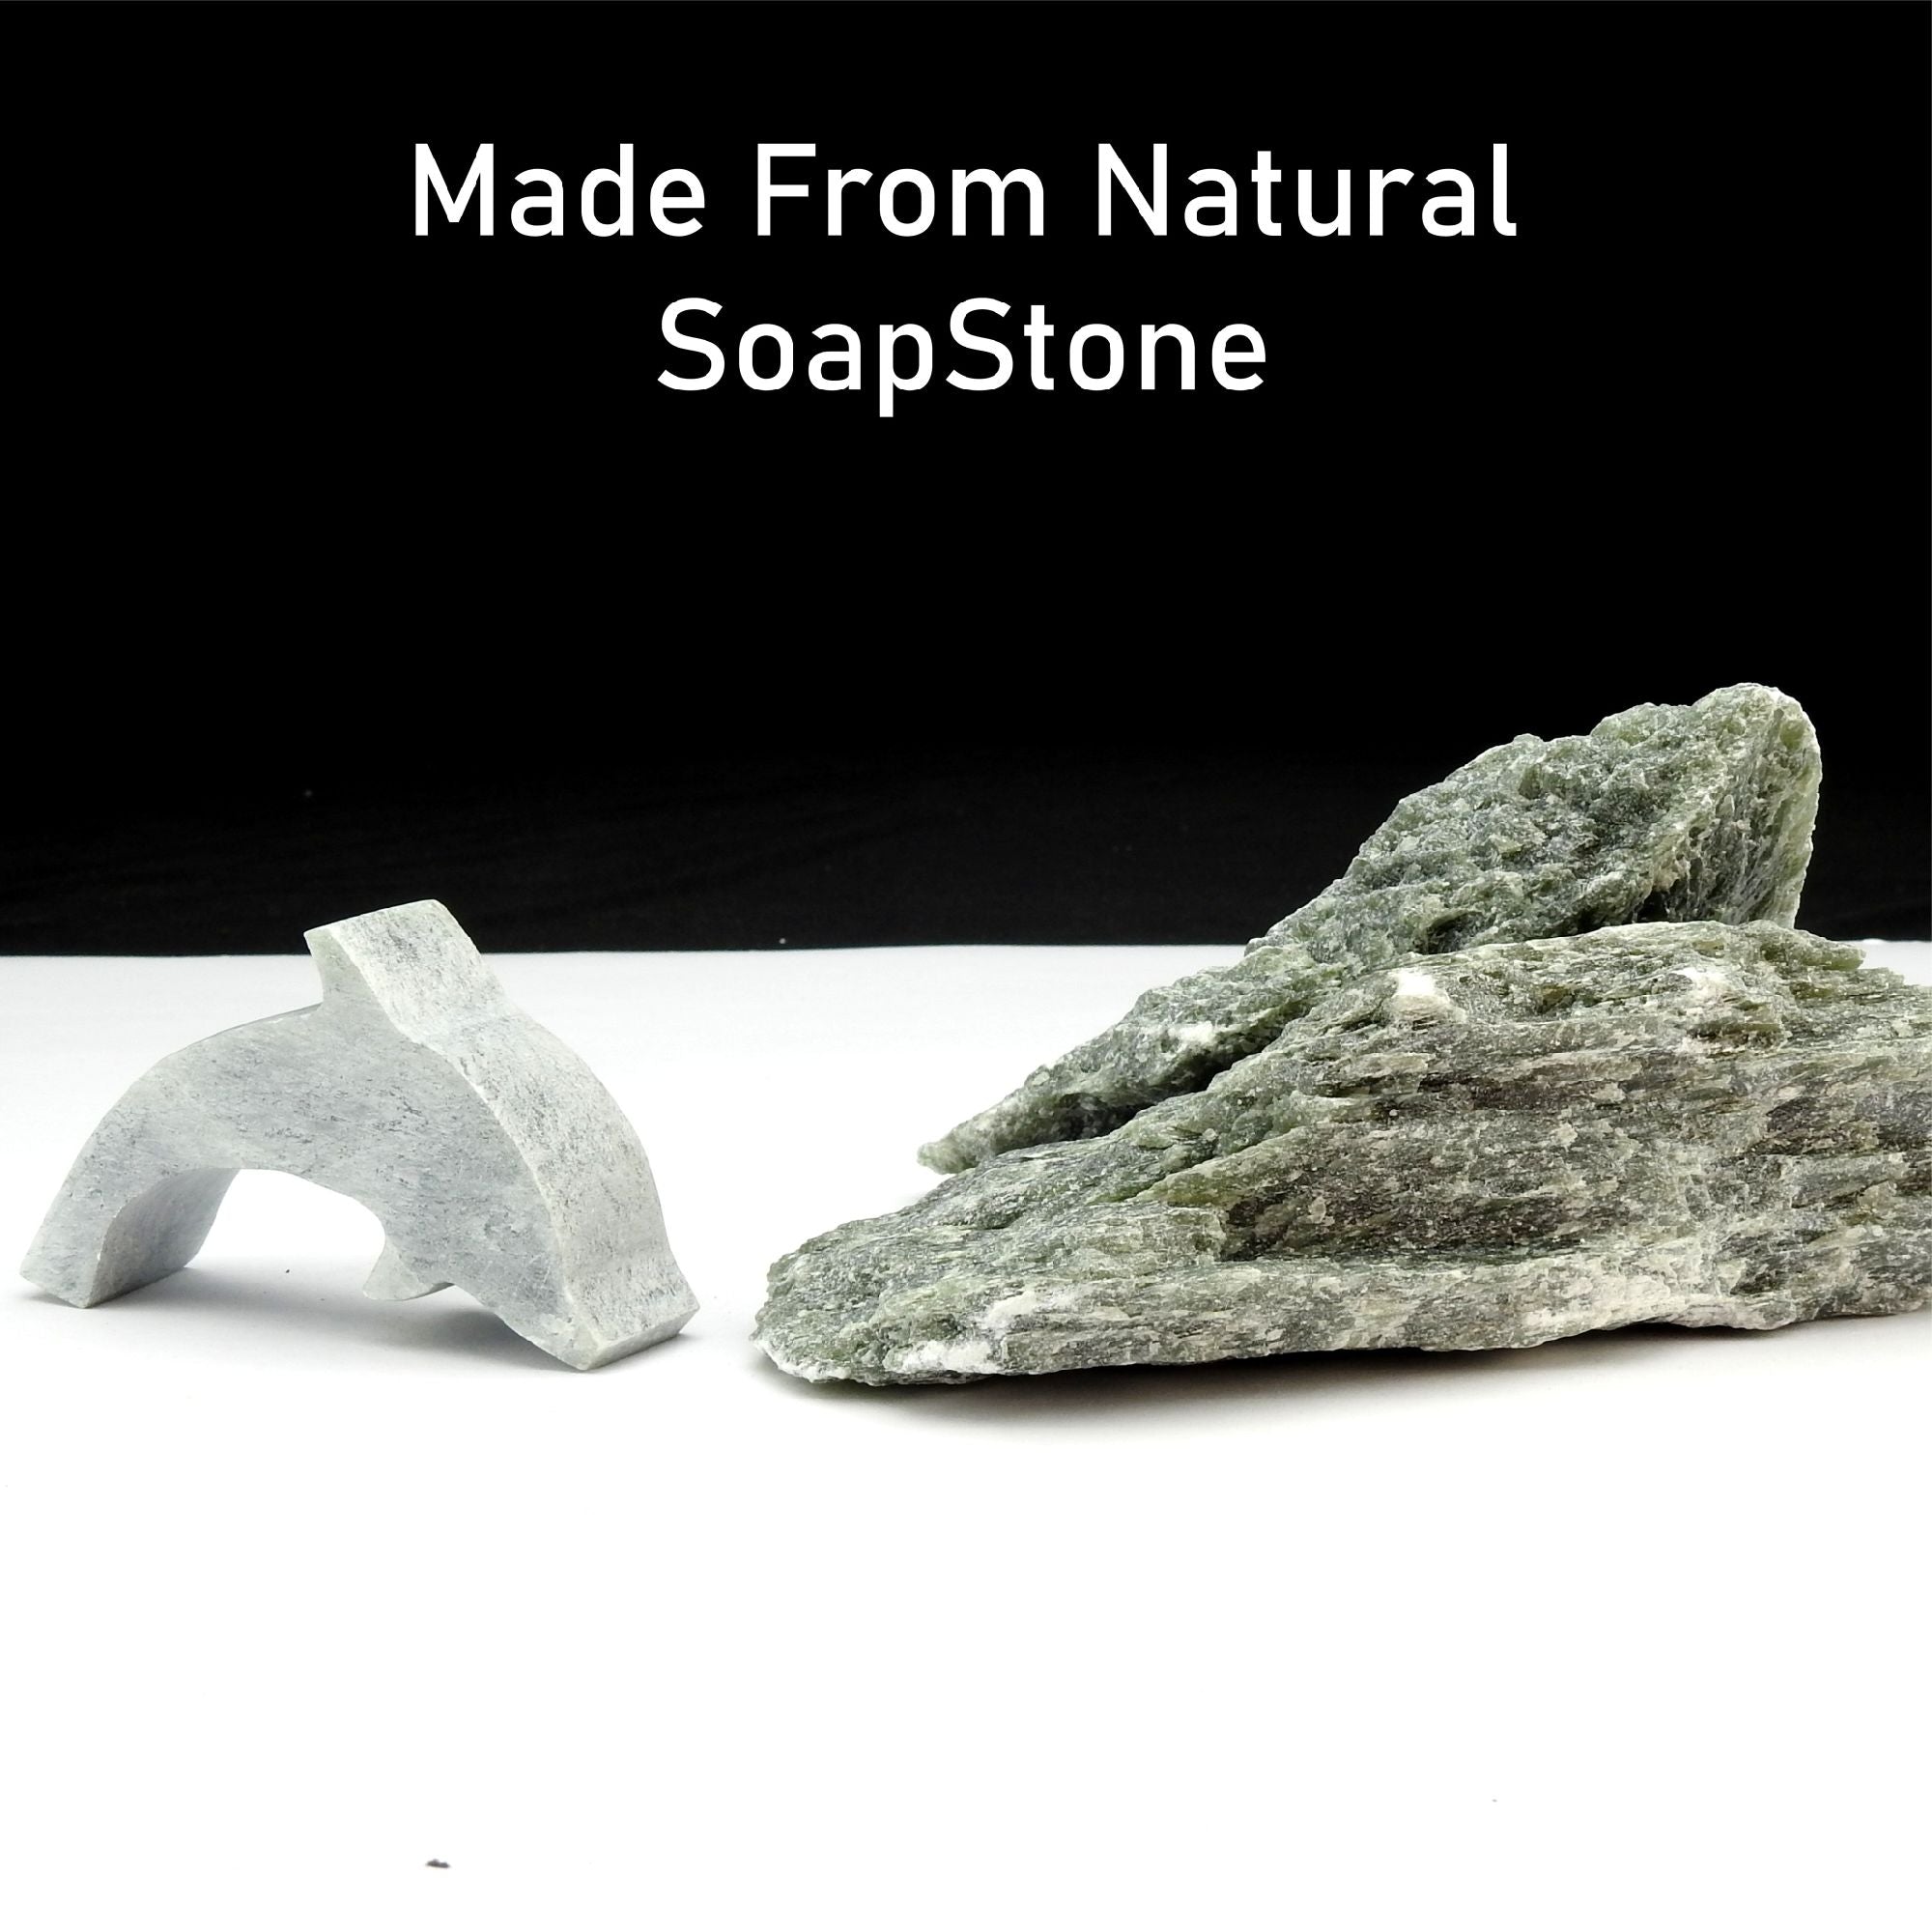 Dolphin Soapstone Carving Kit: Safe and Fun DIY Craft for Kids and Adults with two people carving soapstone.